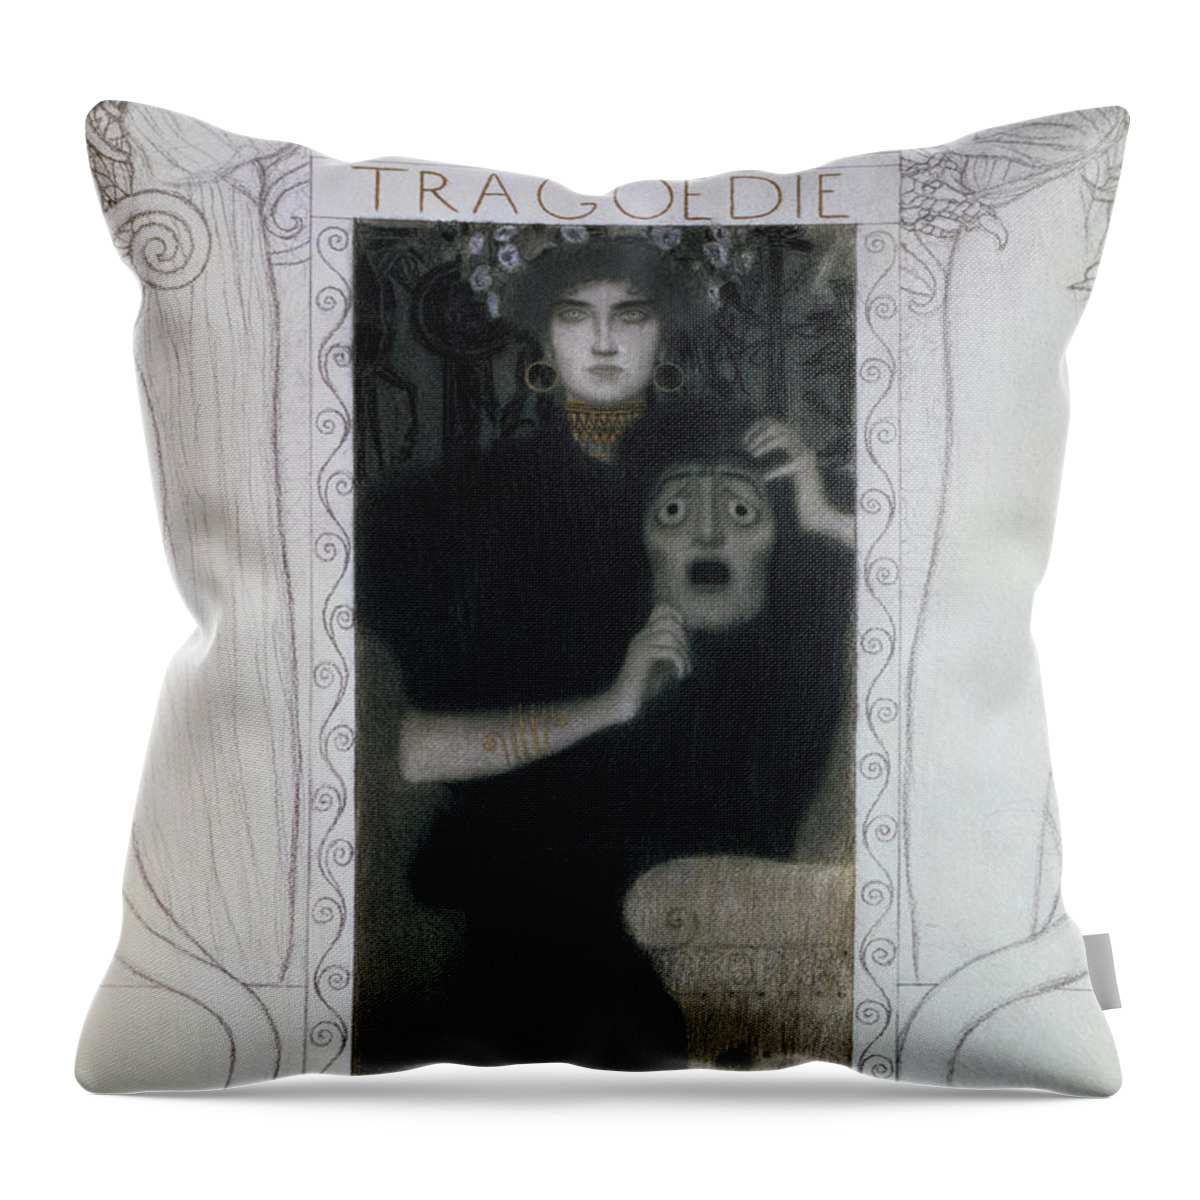 Klimt Throw Pillow featuring the drawing Tragedy, 1897 by Gustav Klimt